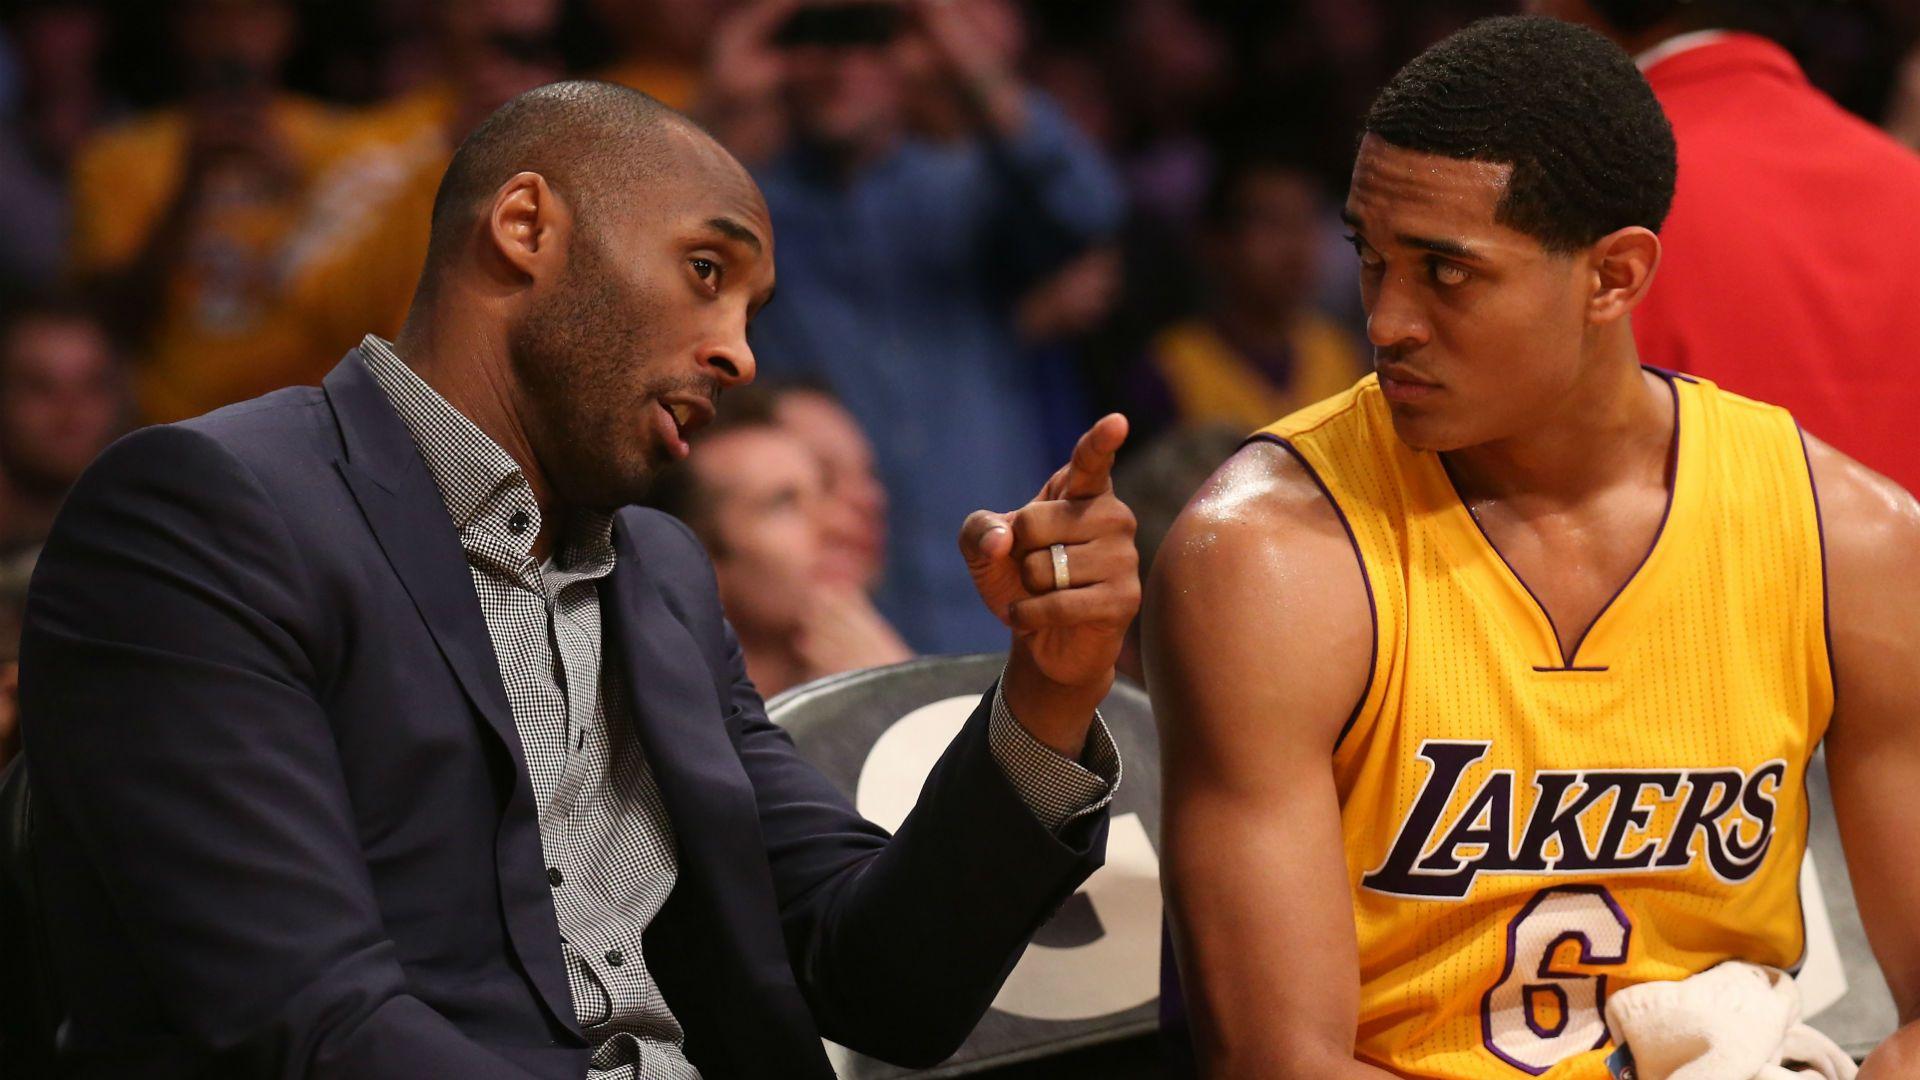 Jordan Clarkson becomes Lakers' first Rookie of the Month. NBA